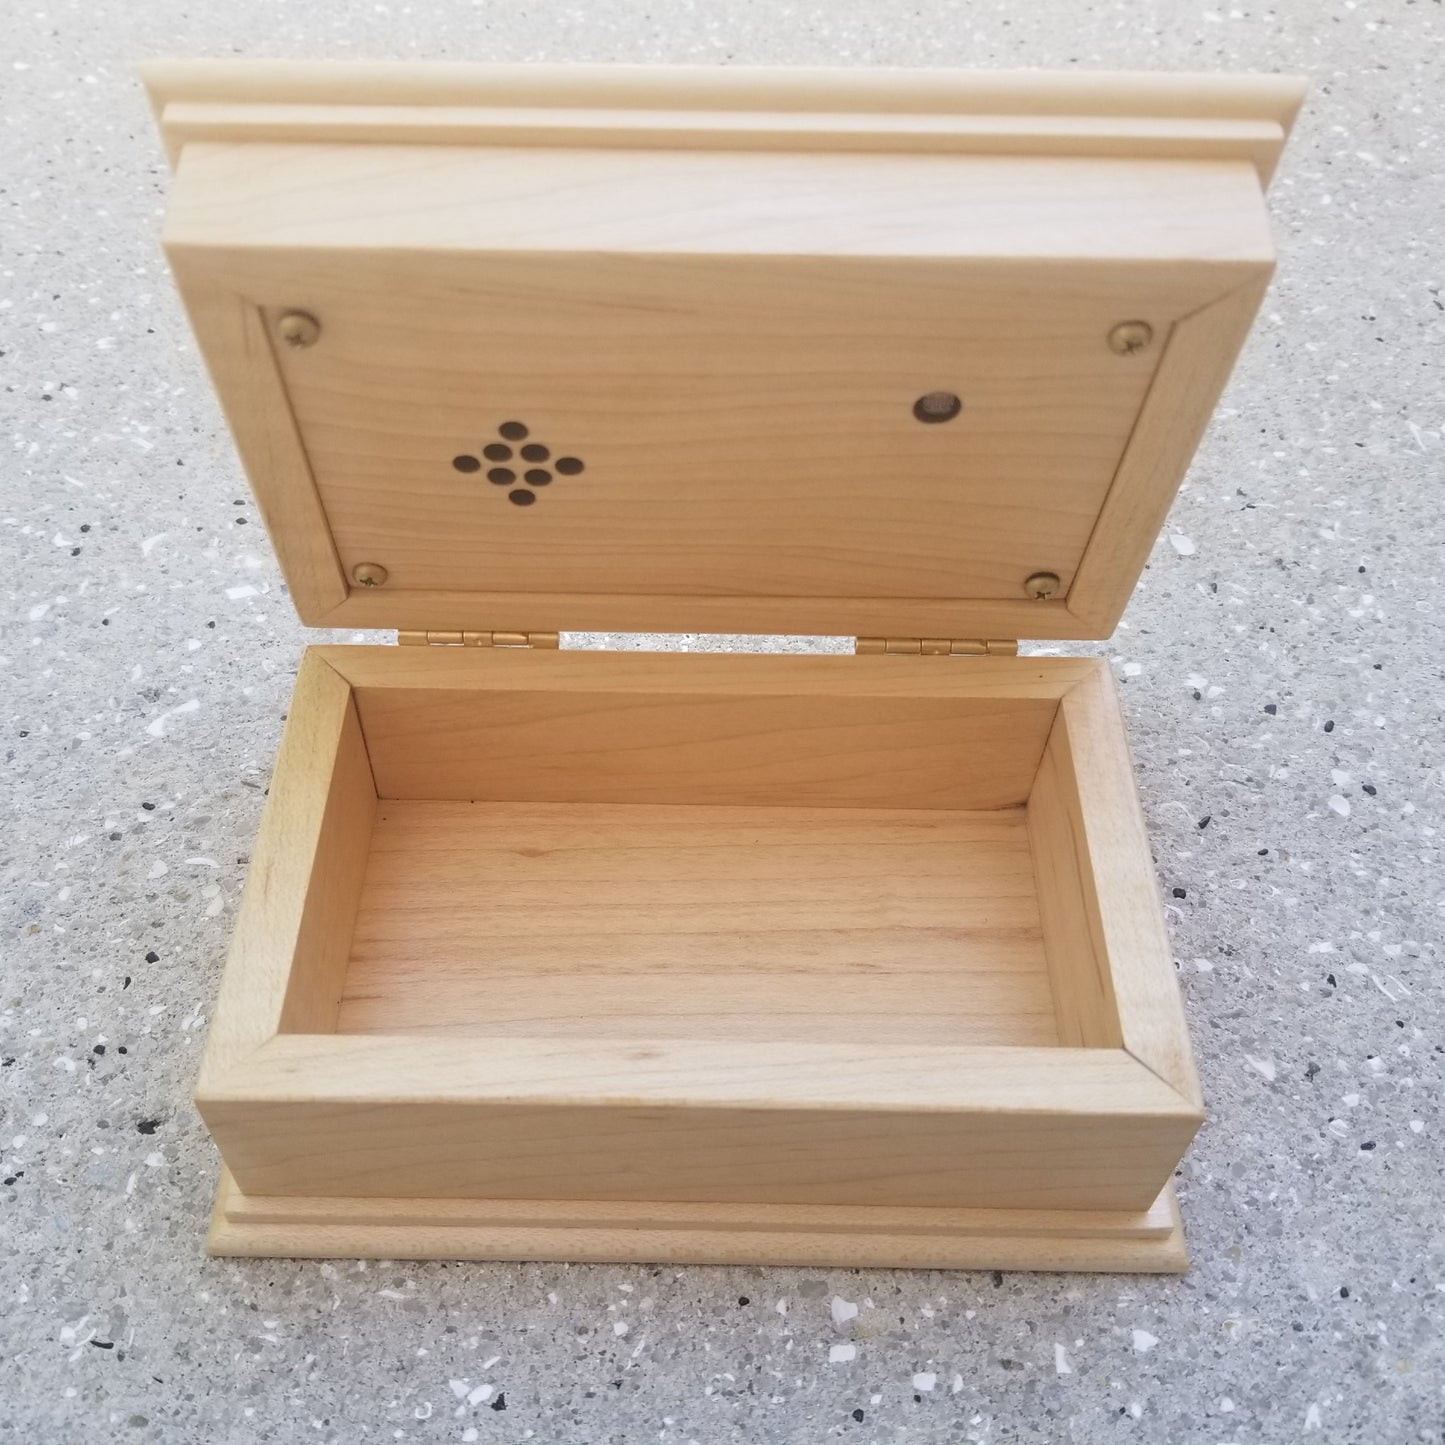 music jewelry box with an open lid showing speakers and light sensor, available at Simplycoolgift